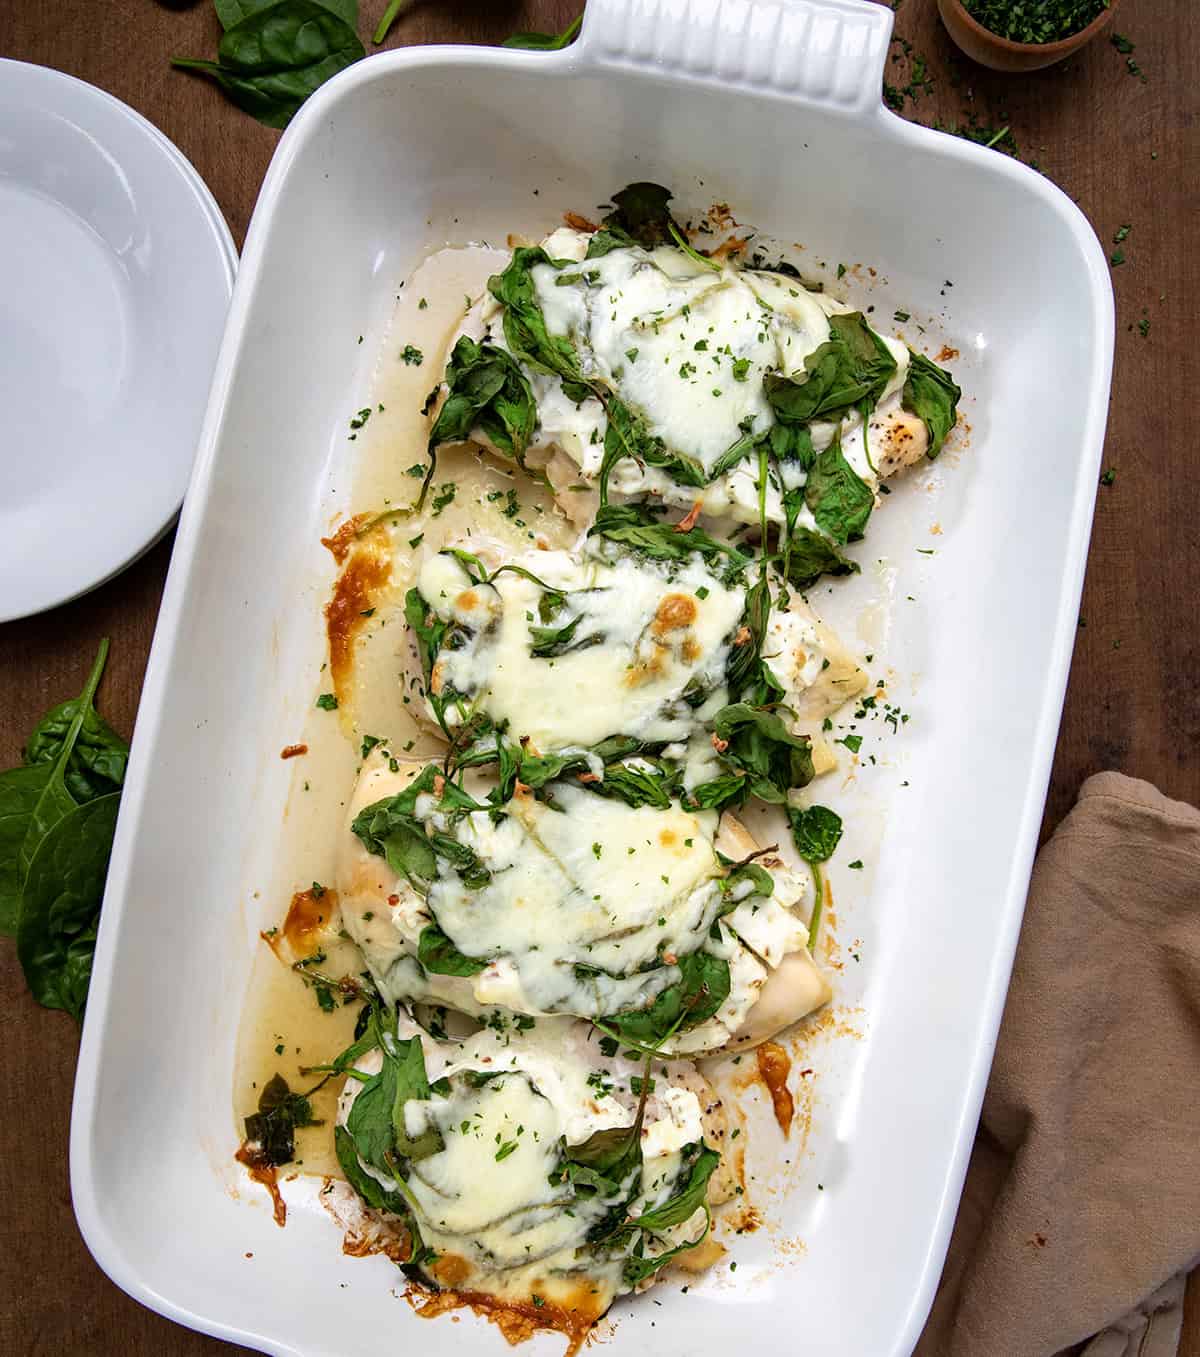 Chicken Spinach Bake on a wooden table in a white pan from overhead.